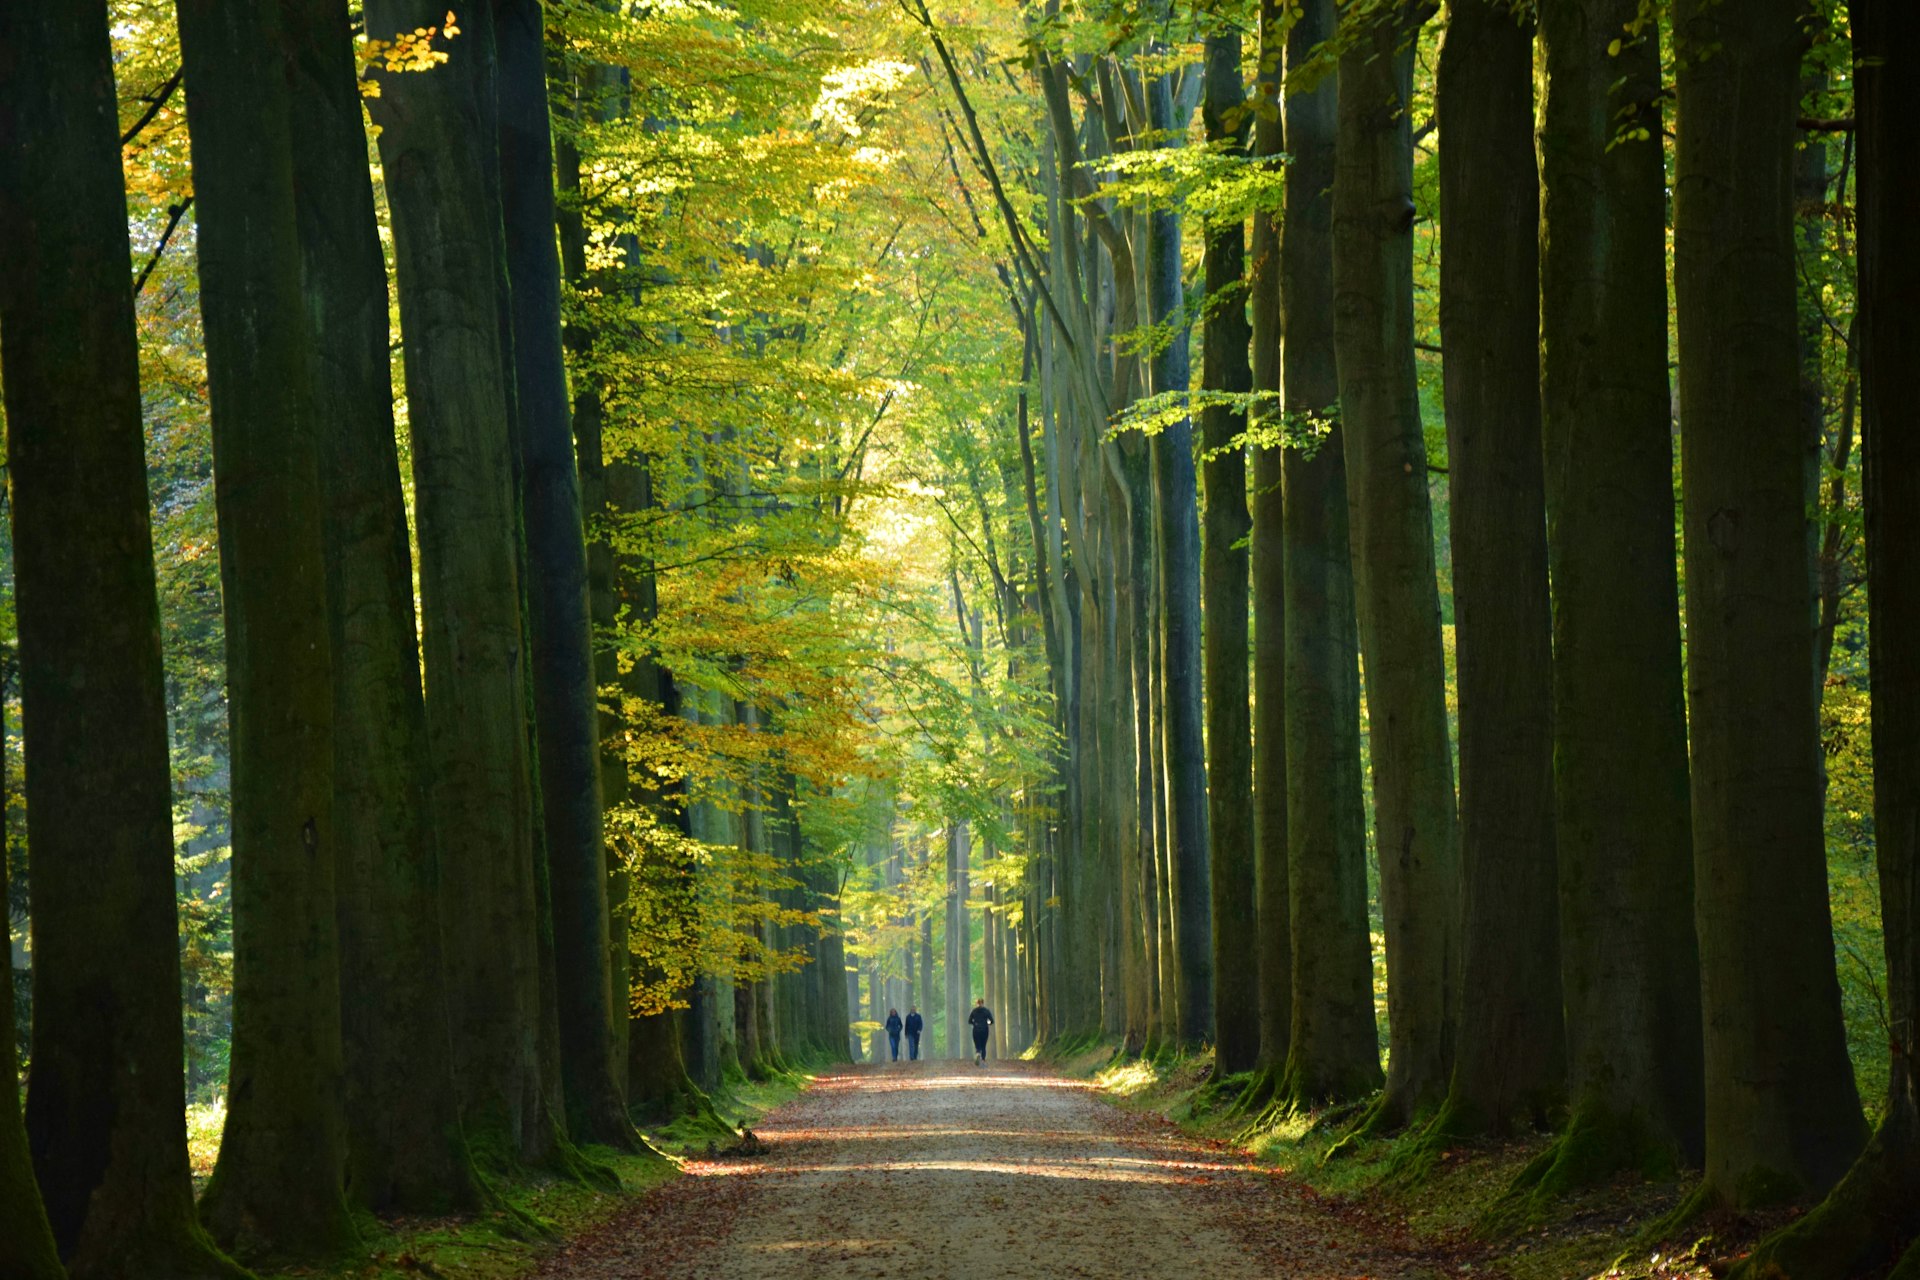 The expansive Forêt de Soignes is a southern stone’s throw away from Brussels